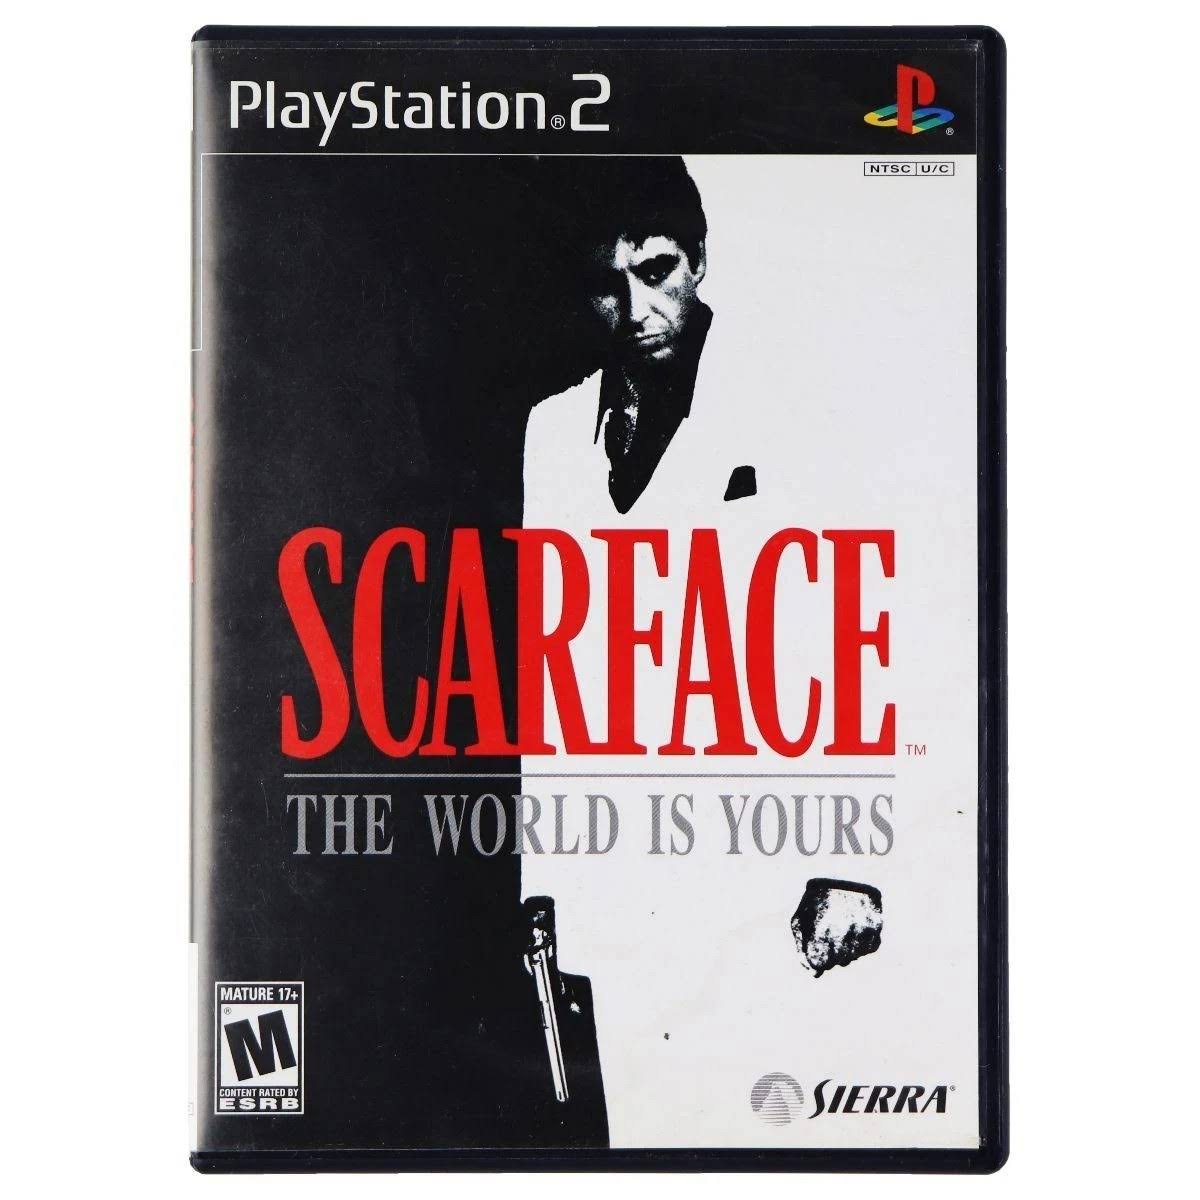 Scarface: The World Is Yours - Playstation 2